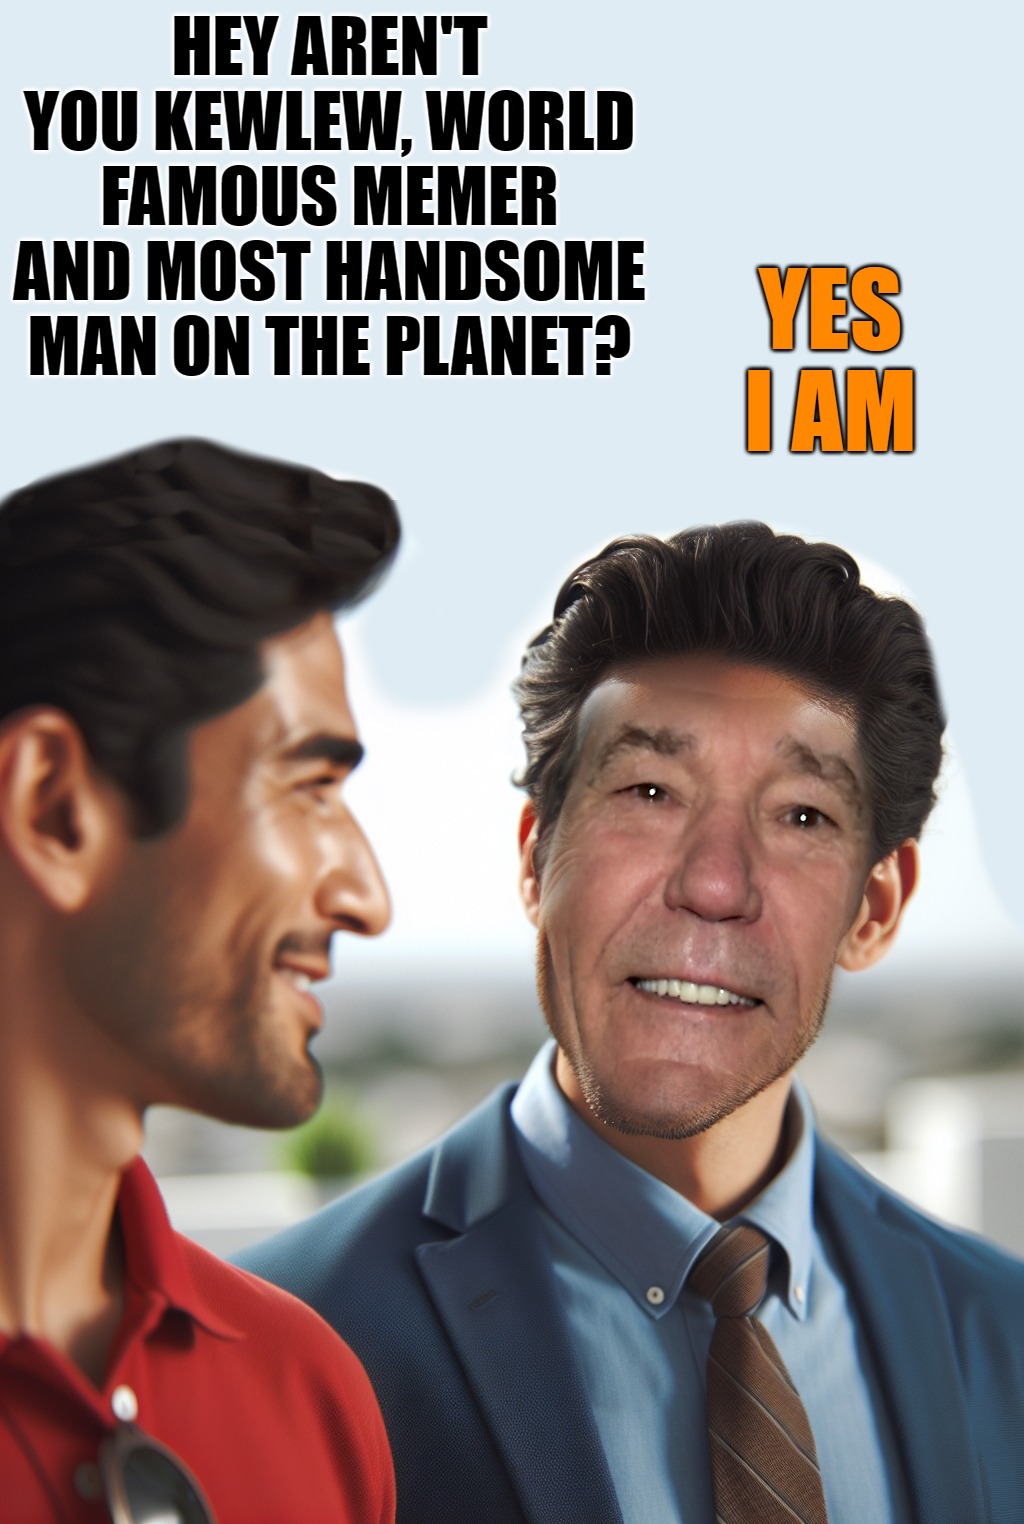 Kewlew world famous memer and most handsome man on the planet. | HEY AREN'T YOU KEWLEW, WORLD FAMOUS MEMER AND MOST HANDSOME MAN ON THE PLANET? YES I AM | image tagged in most handsome man on the planet,world famous memer,kewlew | made w/ Imgflip meme maker